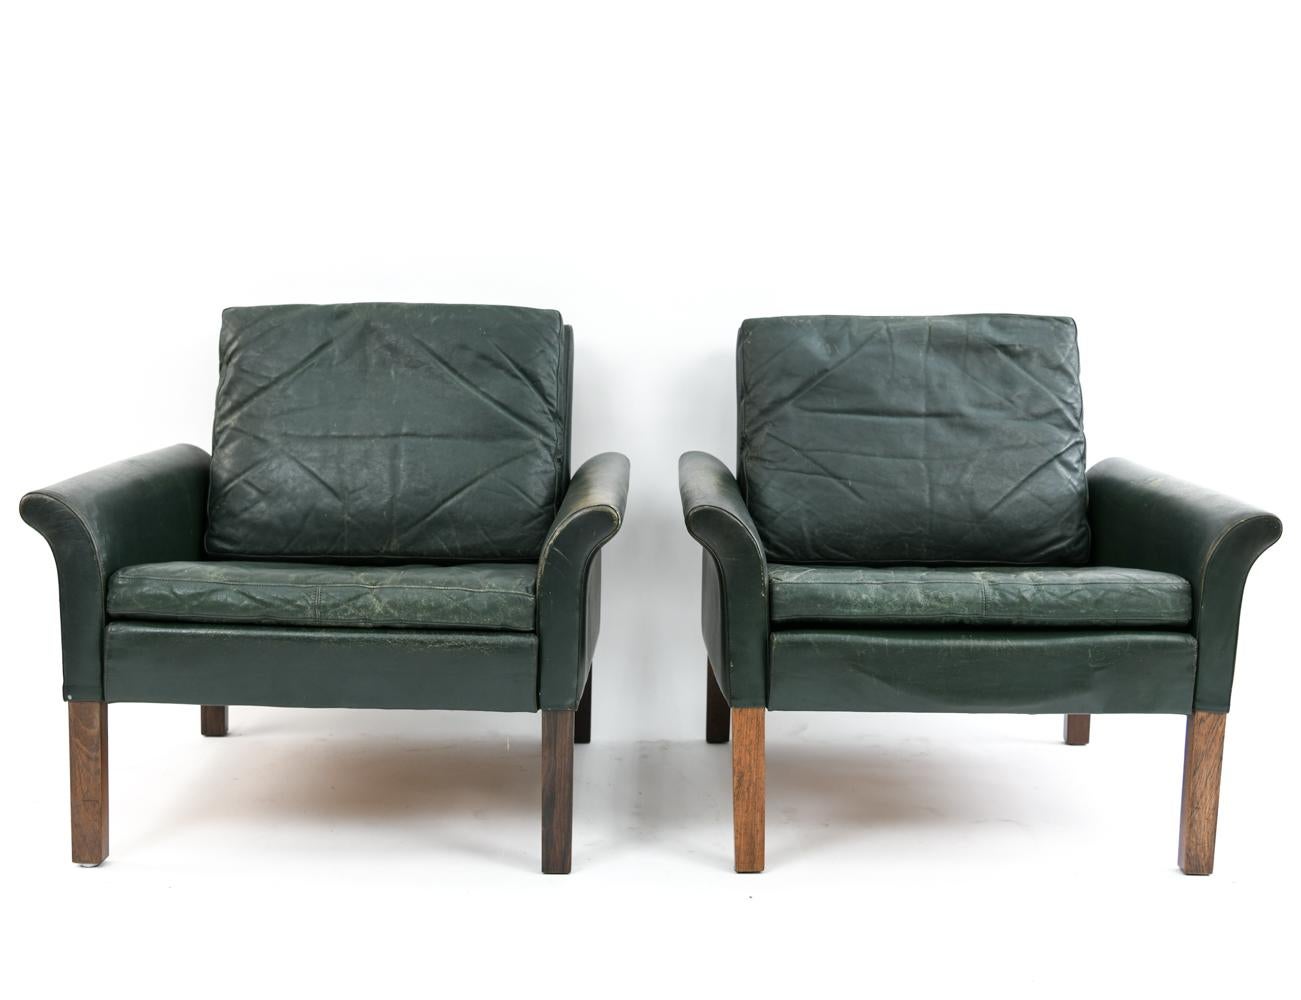 Mid-20th Century Pair of Hans Olsen for CS Møbler Model 500 Leather Easy Chairs, circa 1950s